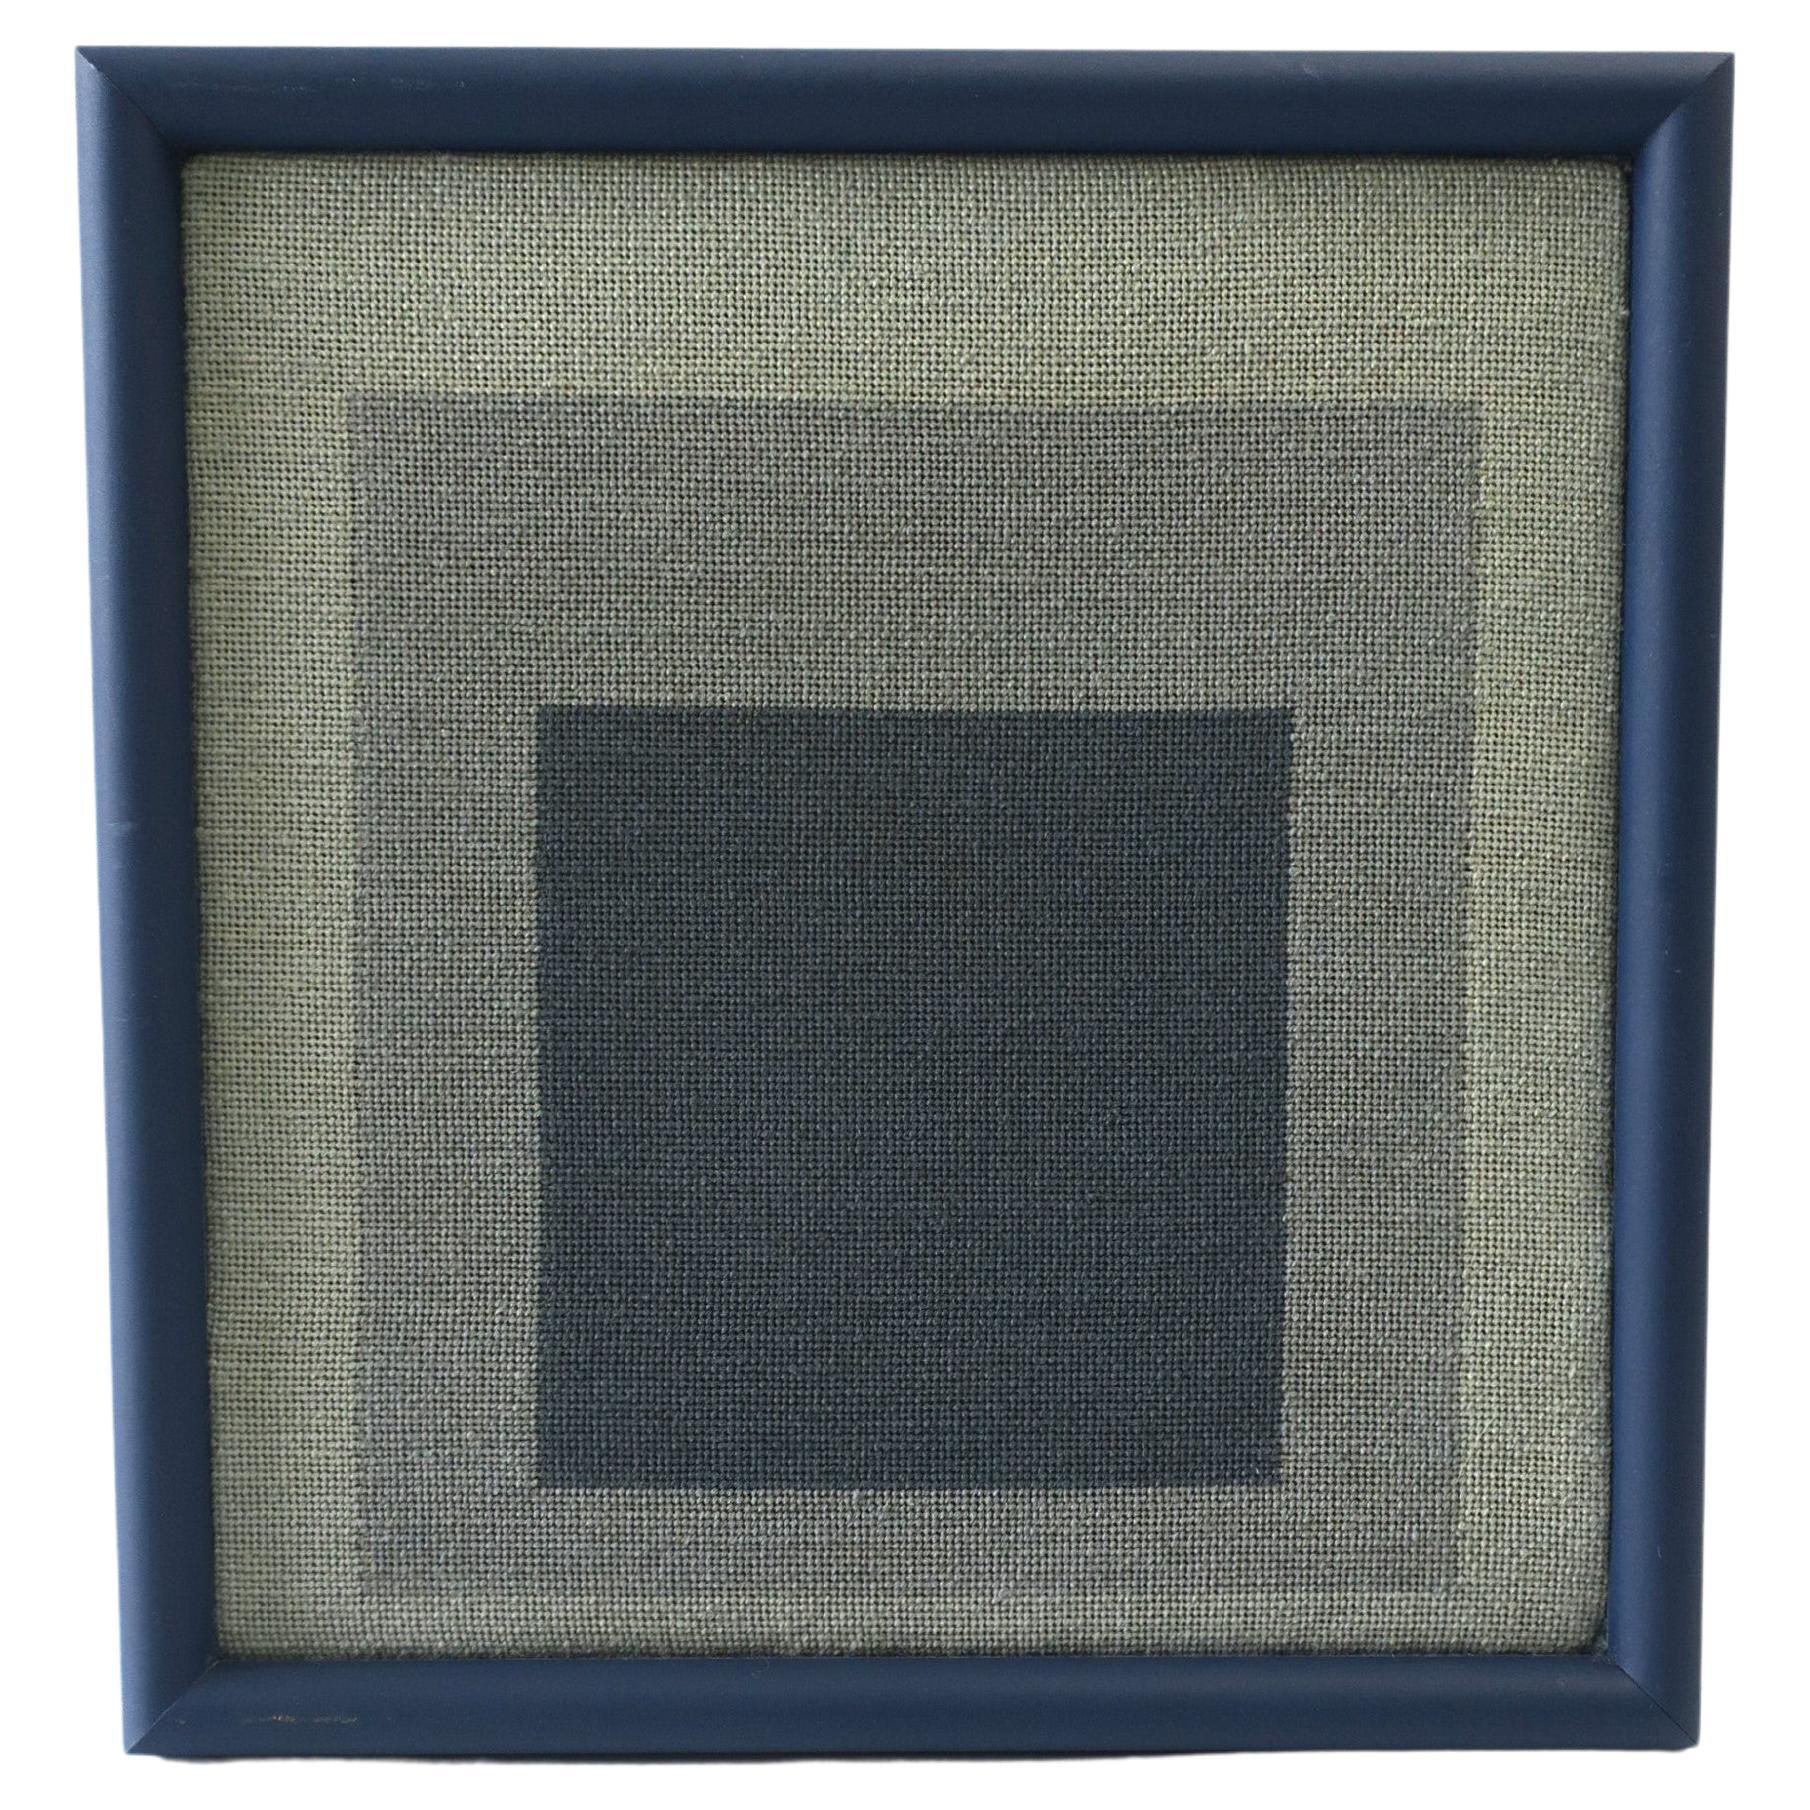 A blue geometric needlepoint artwork wall art styled after German artist, Josef Albers, circa late-20th century. This needlepoint piece is admiration to Albers' 'Homage to the Square' painting artwork from the 1950s. This artwork has a powder coated